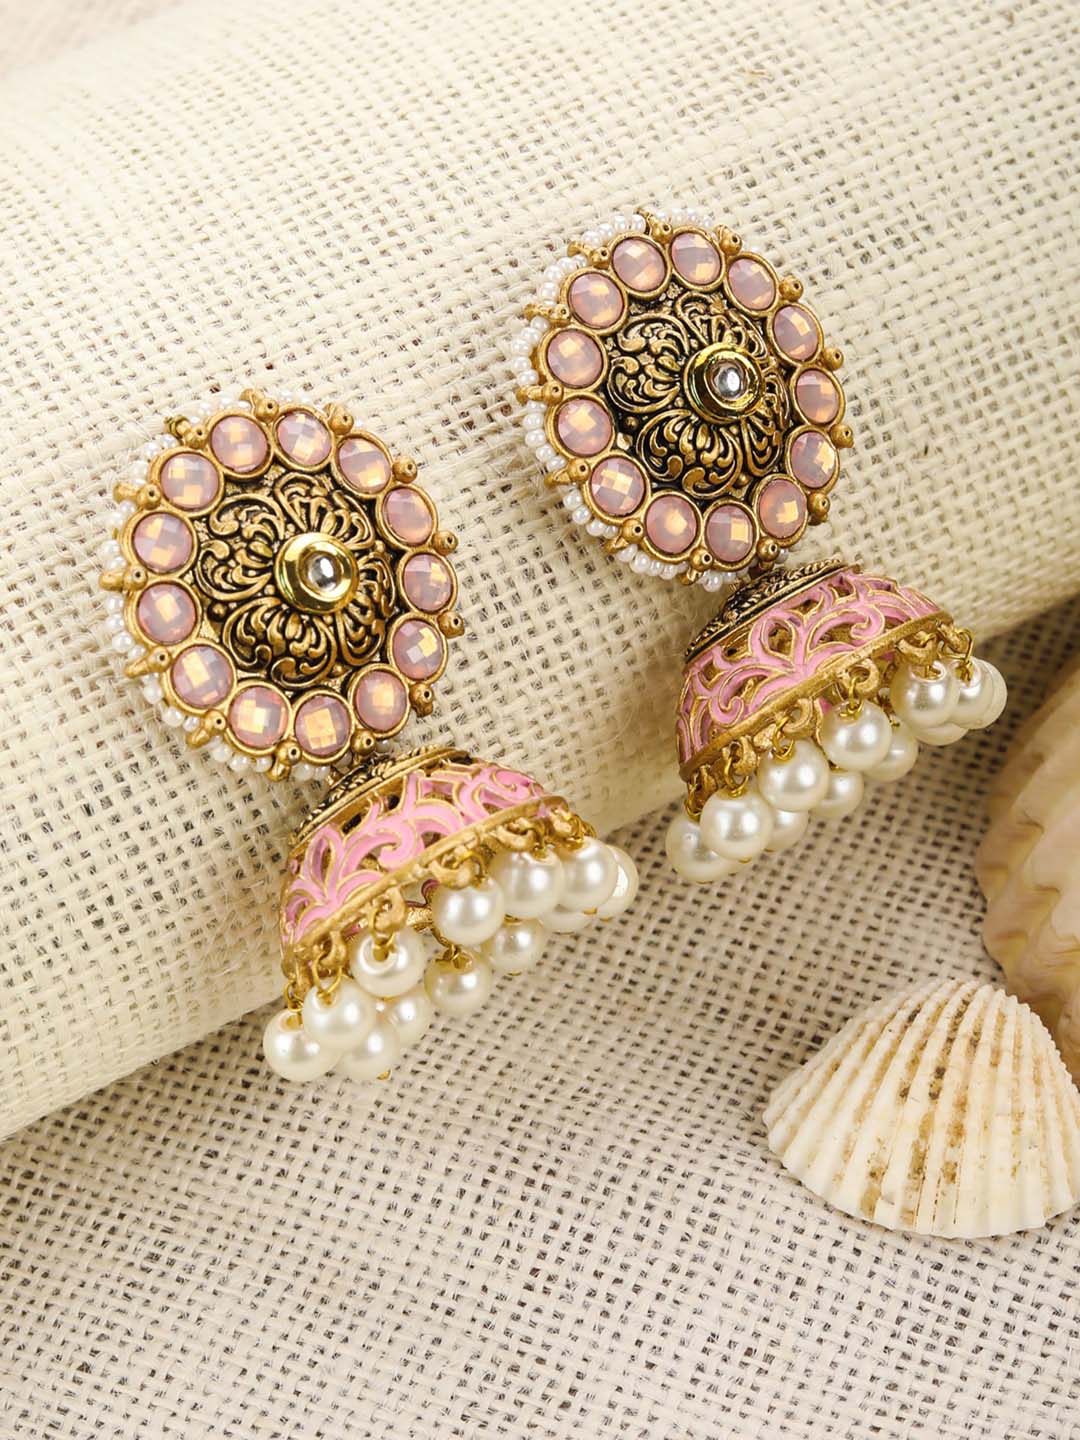 White and Golden polymer clay earrings – Fashionous